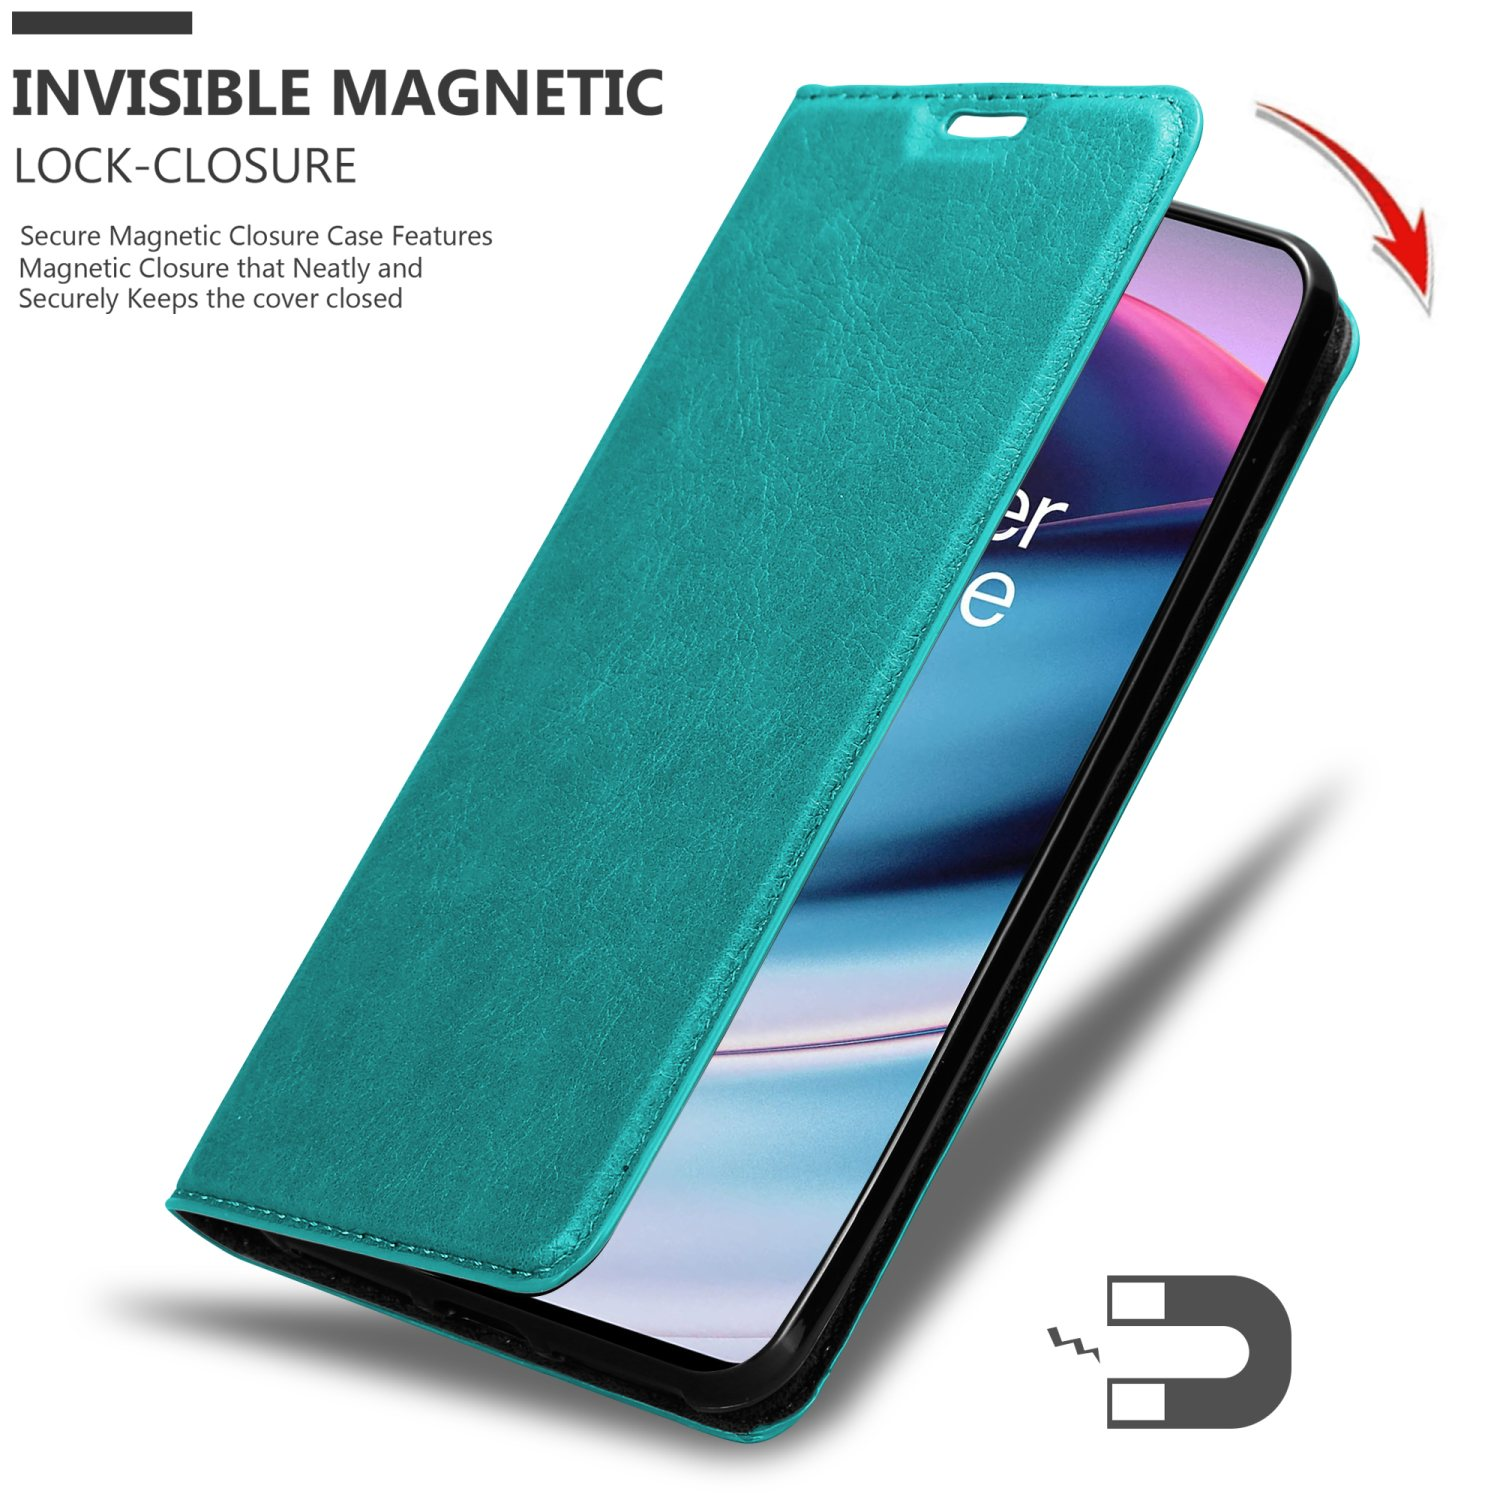 CADORABO Book Hülle Nord Invisible PETROL CE Magnet, OnePlus, Bookcover, TÜRKIS 5G